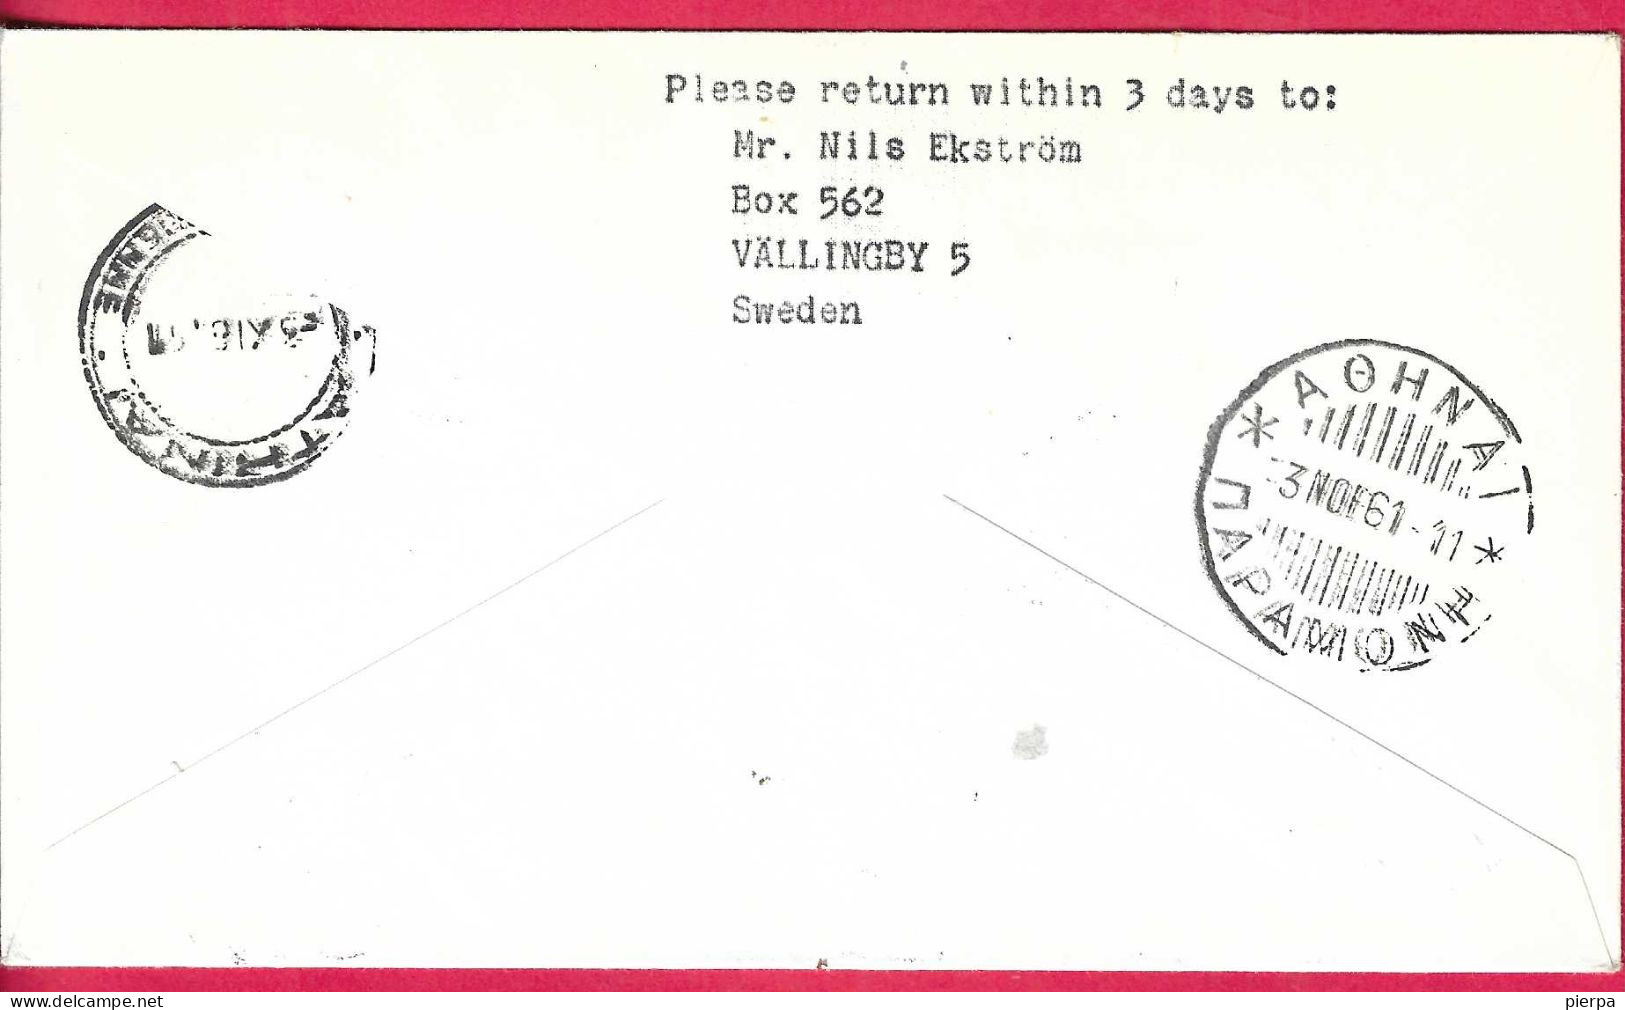 DANMARK - FIRST SAS FLIGHT DC 8 FROM KOPENHAGEN TO ATHEN* 2.11.1961* ON OFFICIAL COVER - Airmail